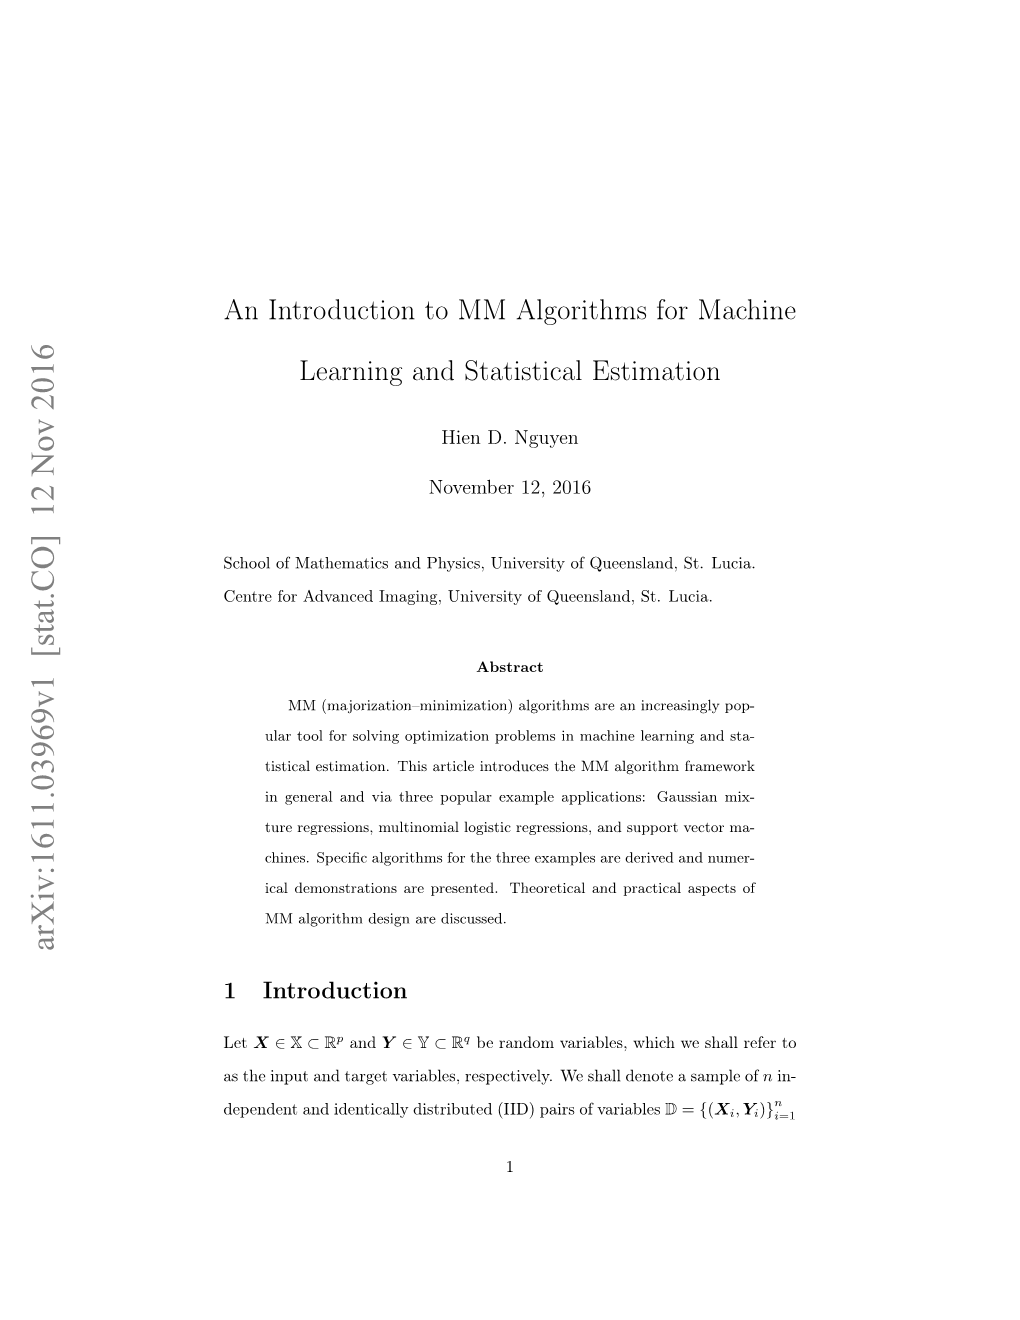 An Introduction to MM Algorithms for Machine Learning and Statistical